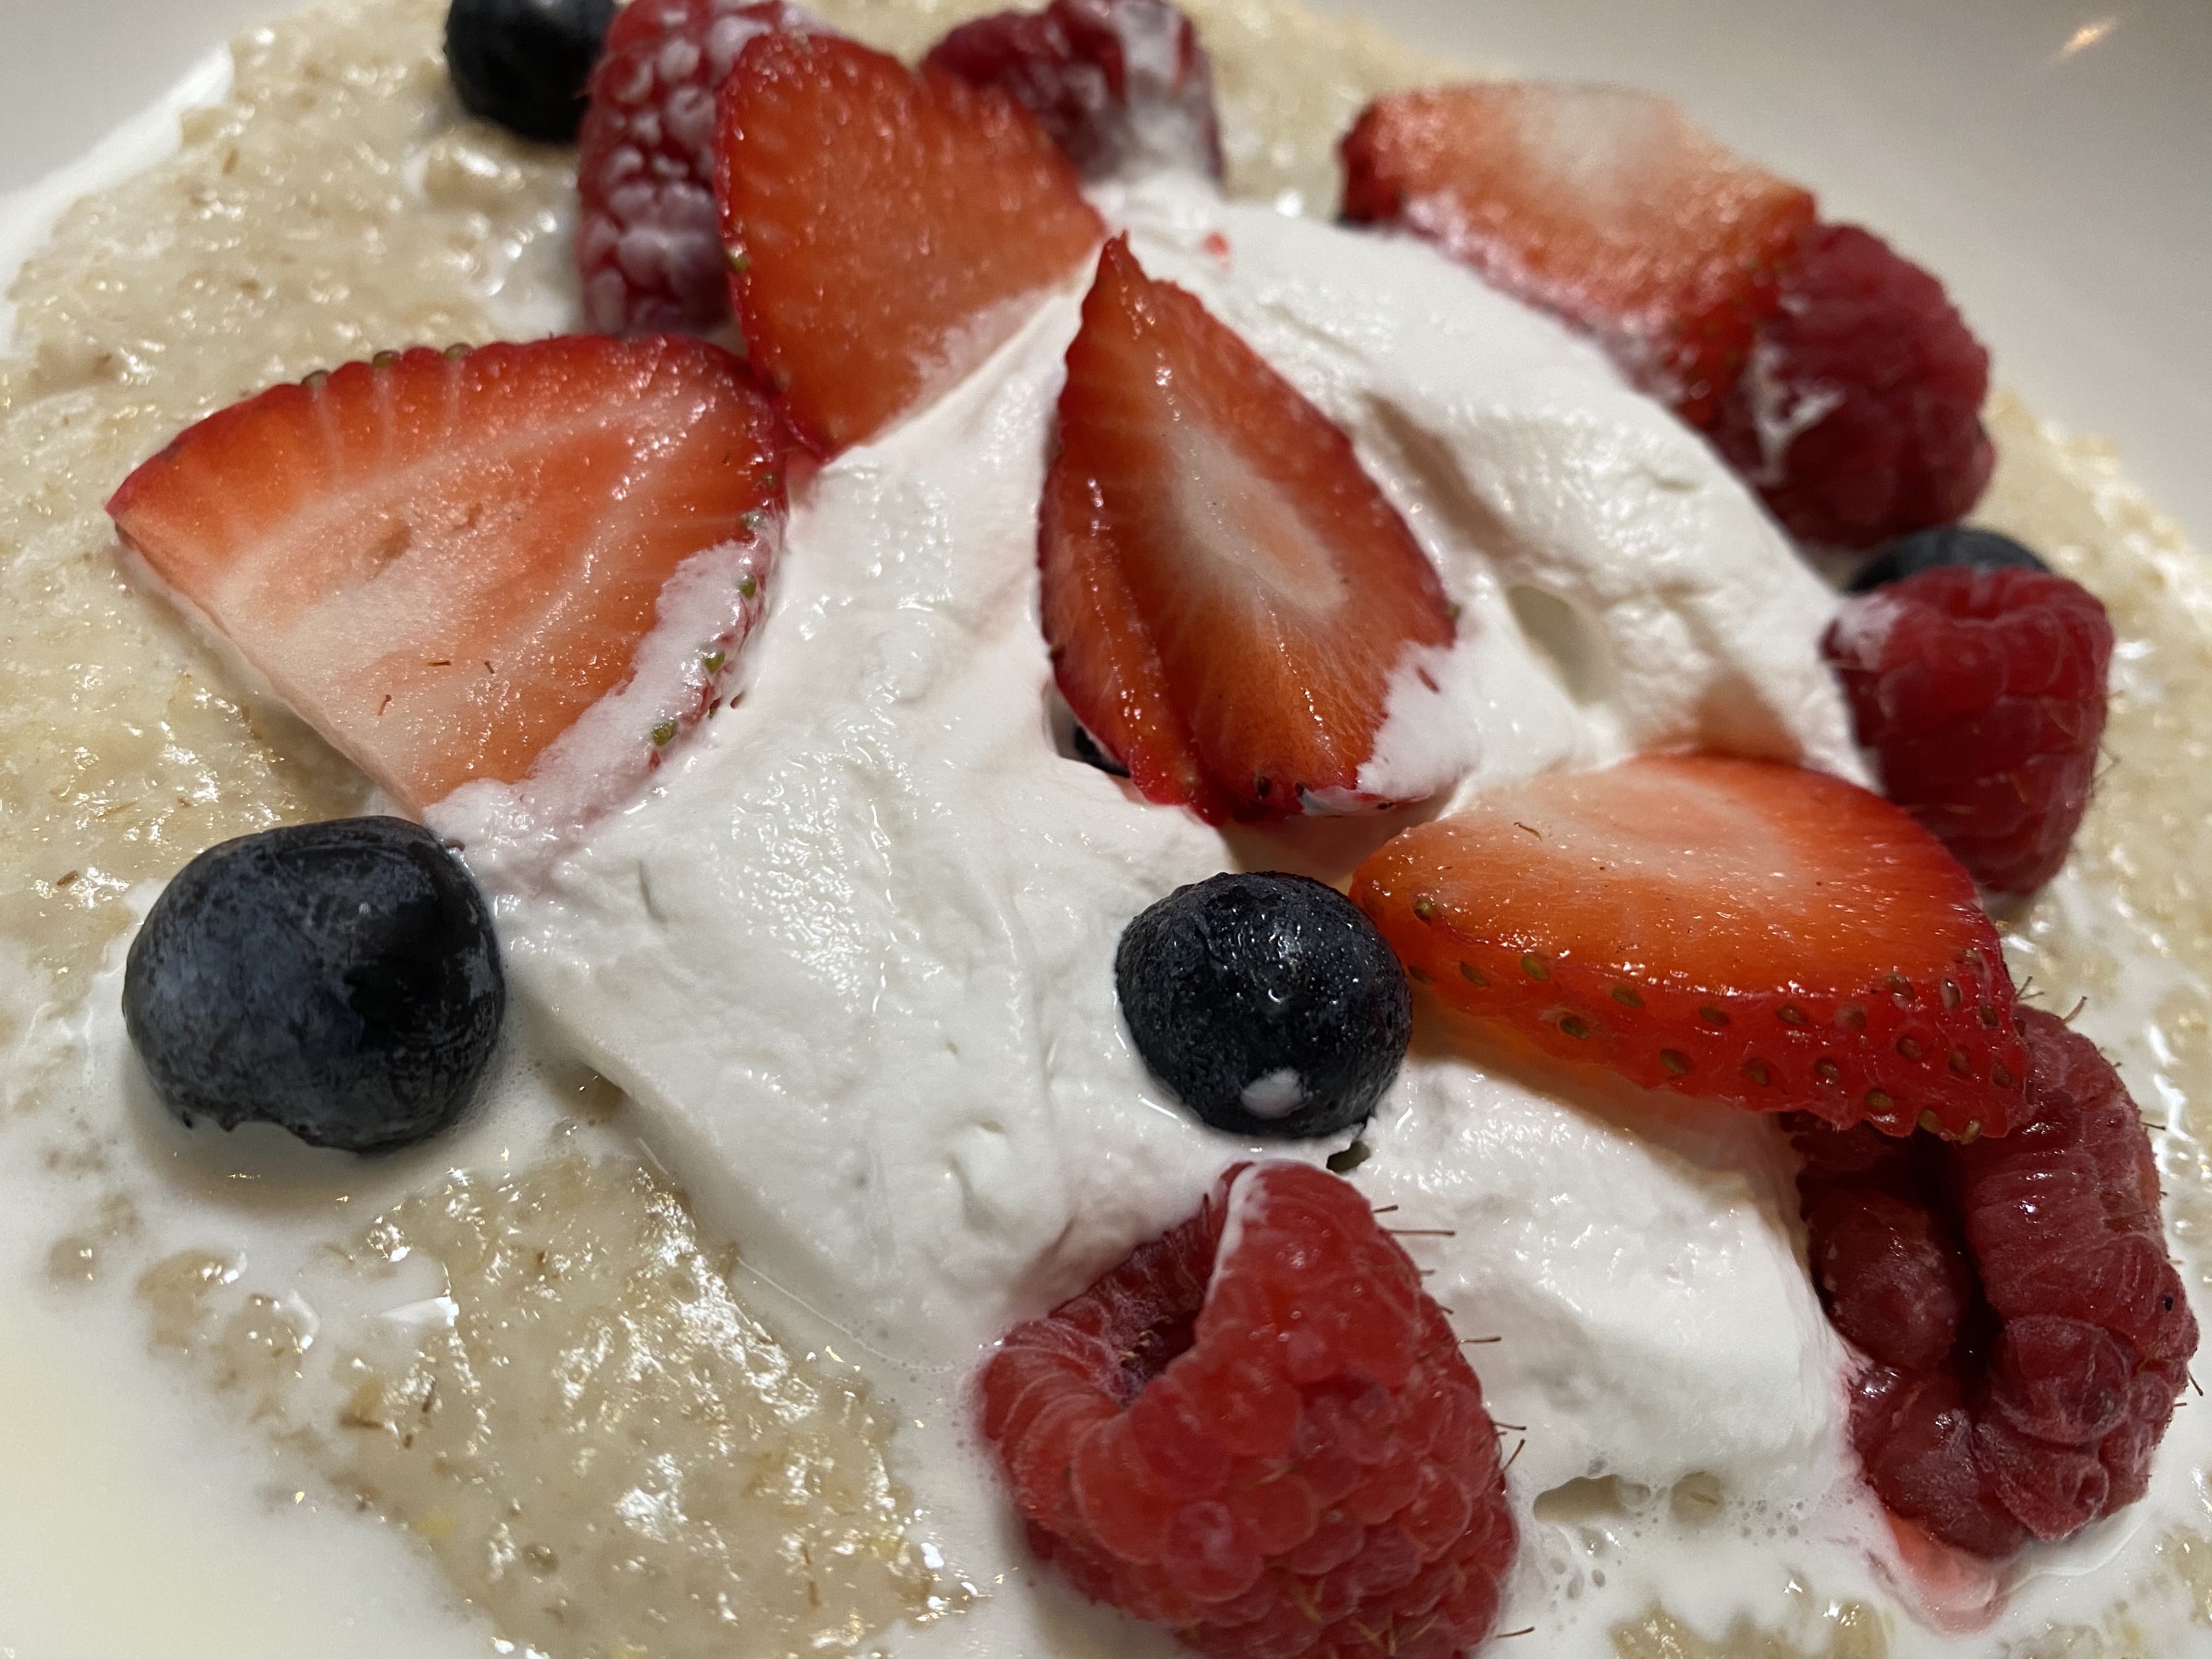 Only available during Brunch - check out our Very Berry Oatmeal!  Home made steel cut oatmeal topped with fresh berries and cream!